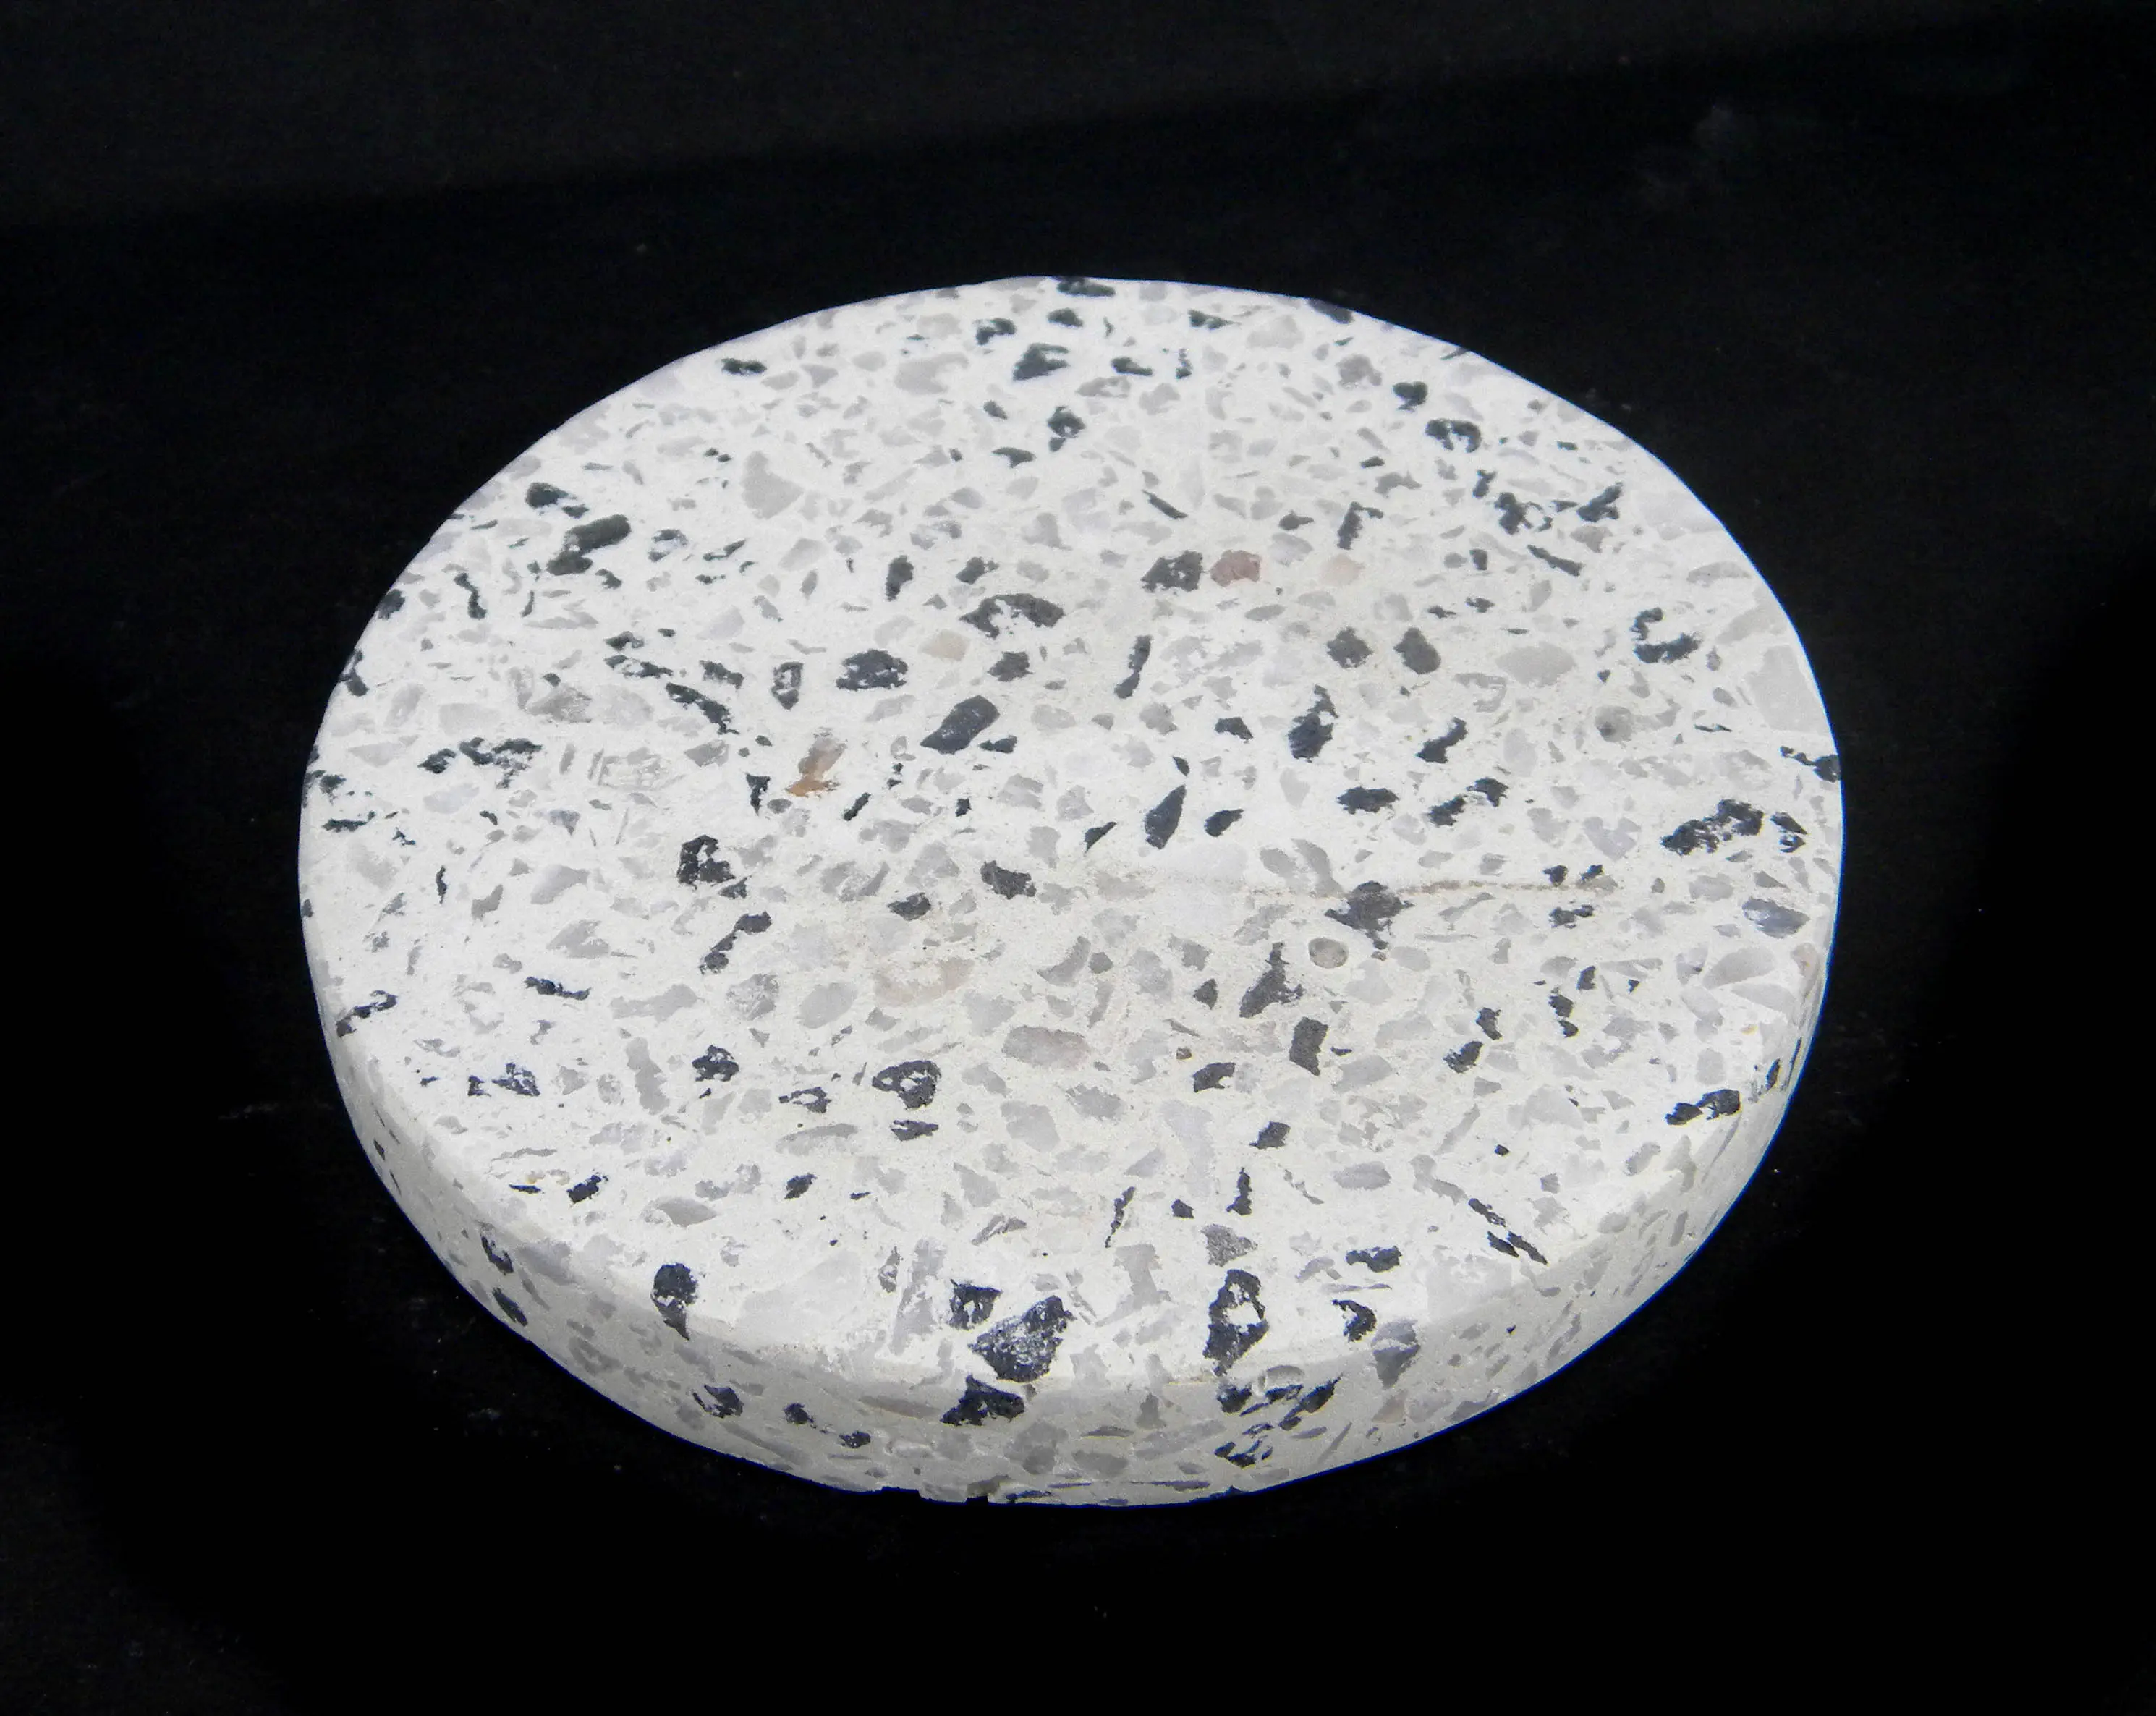 Terrazzo Chip Marble Coaster blend of chips of marble, quartz, granite, glass Mix of White base with reds, blues, pinks, oranges